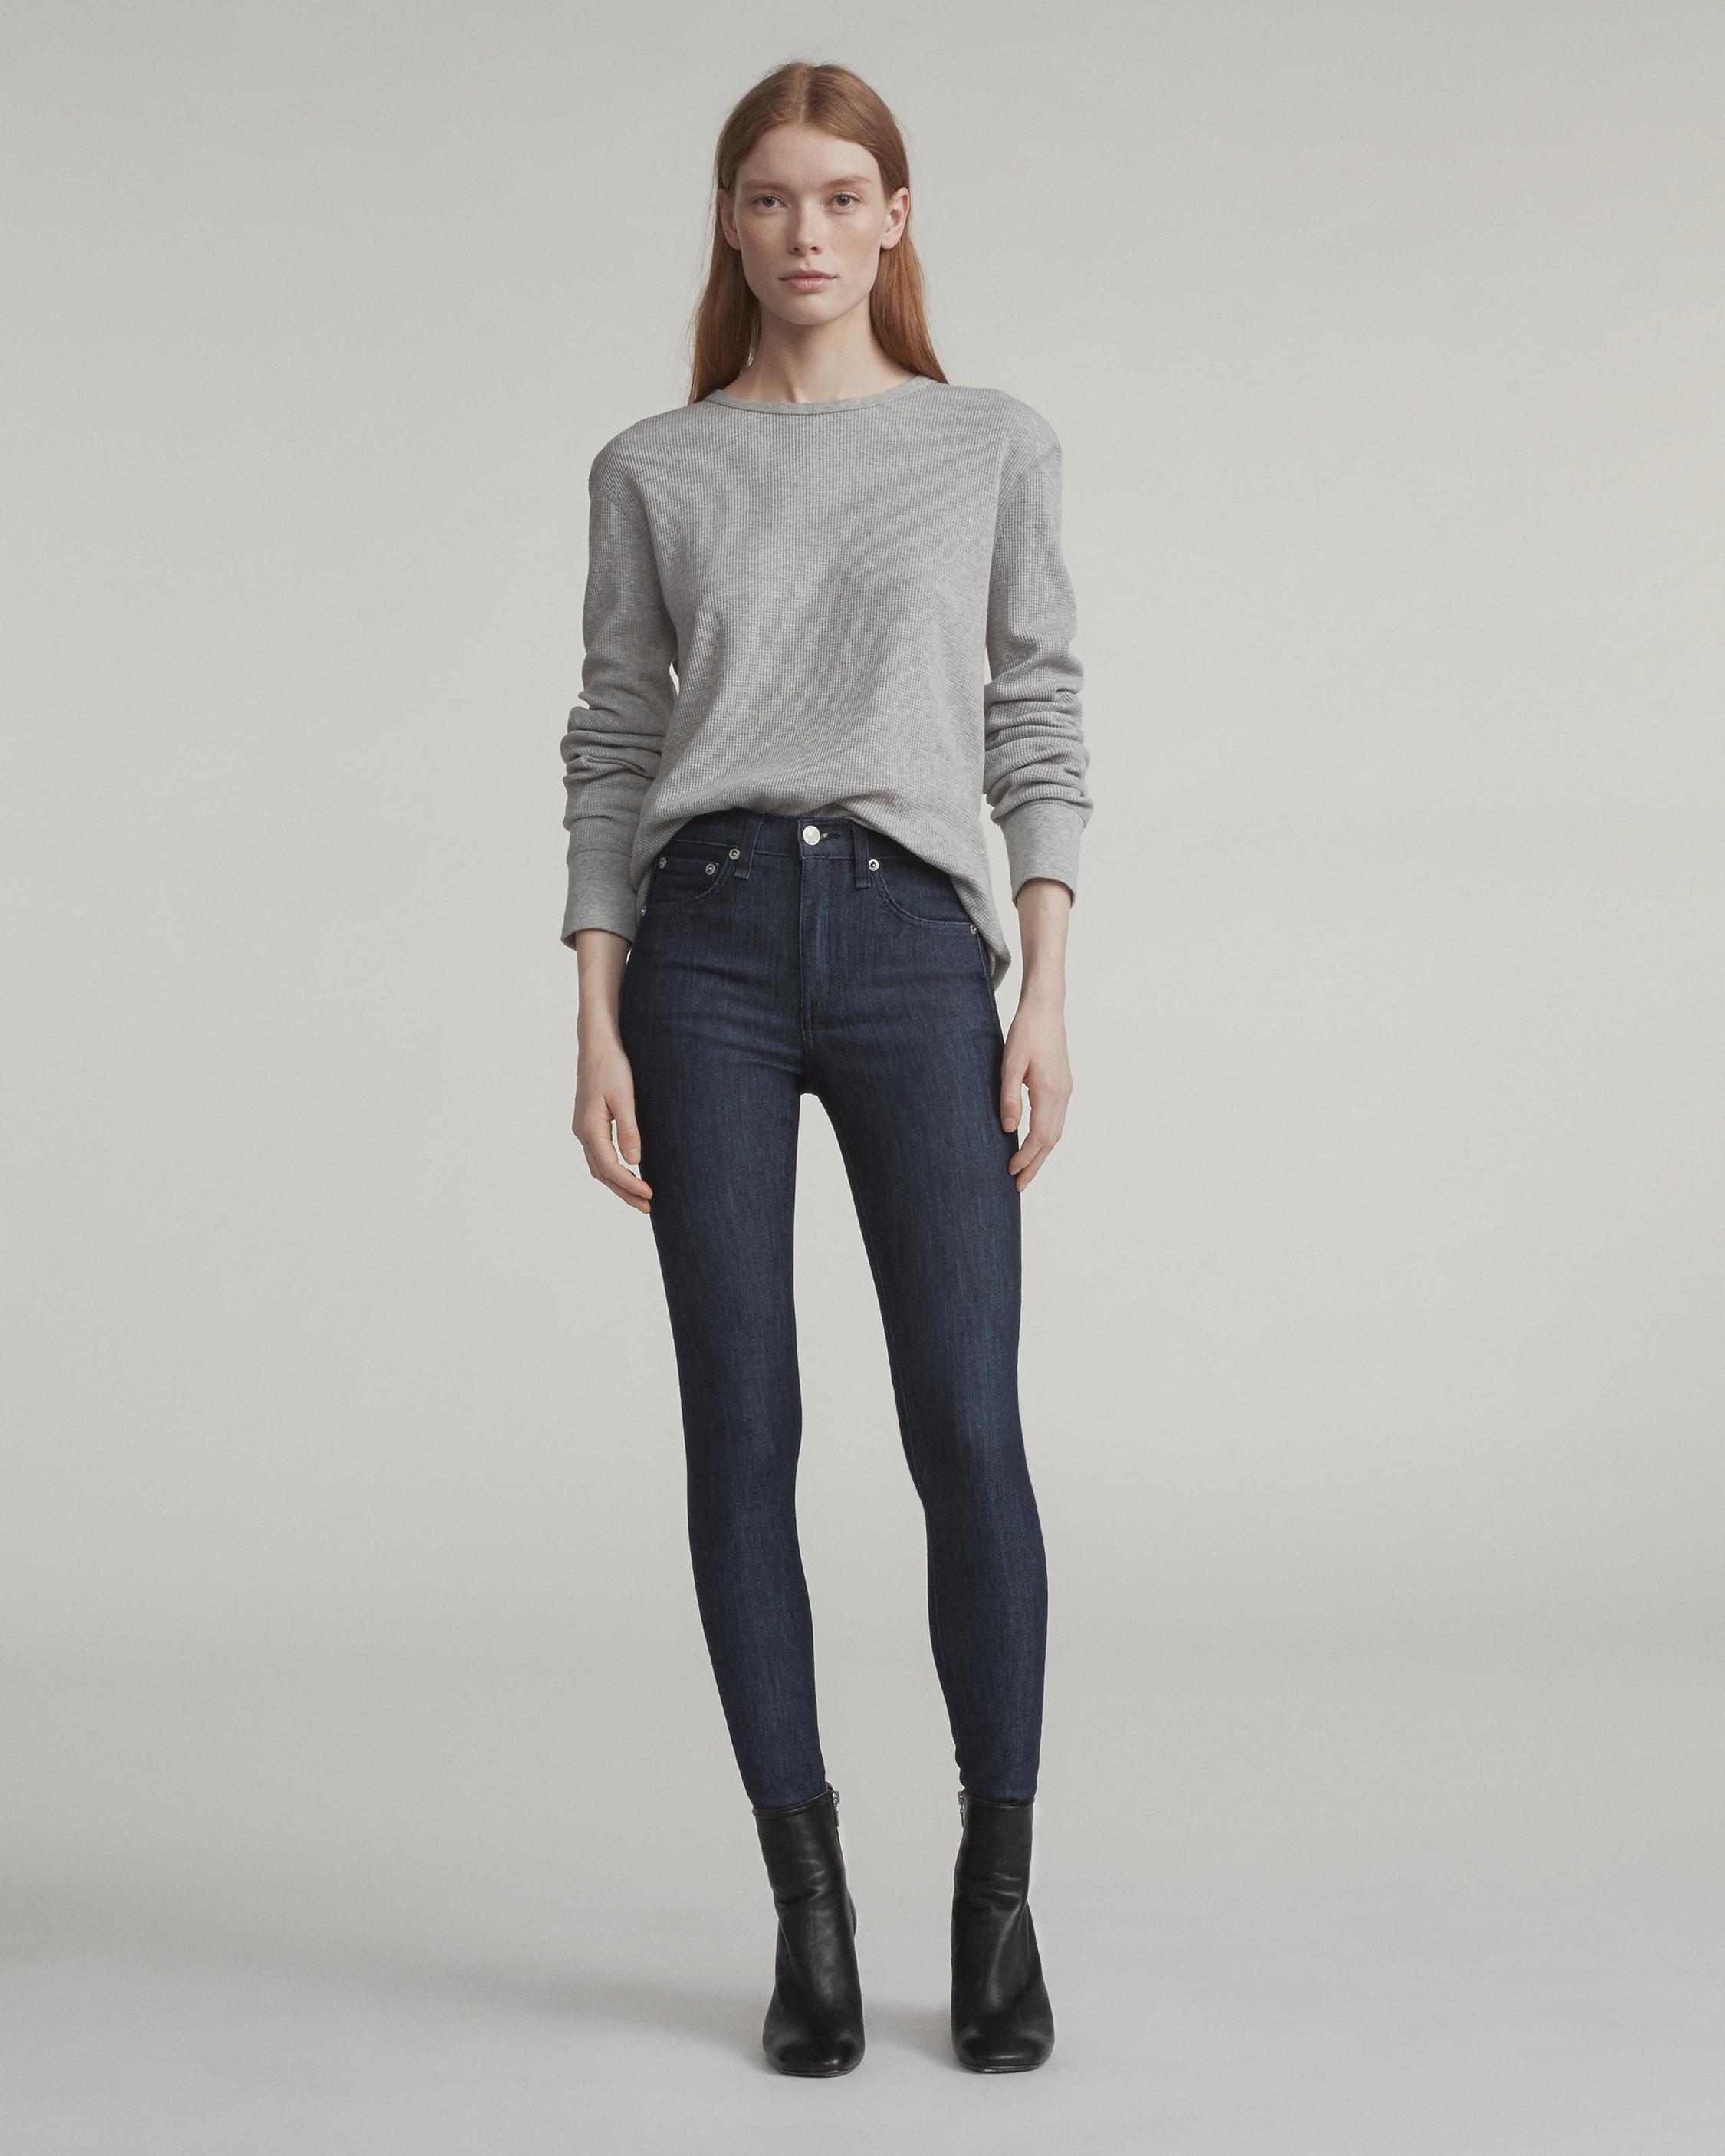 gray high rise skinny jeans